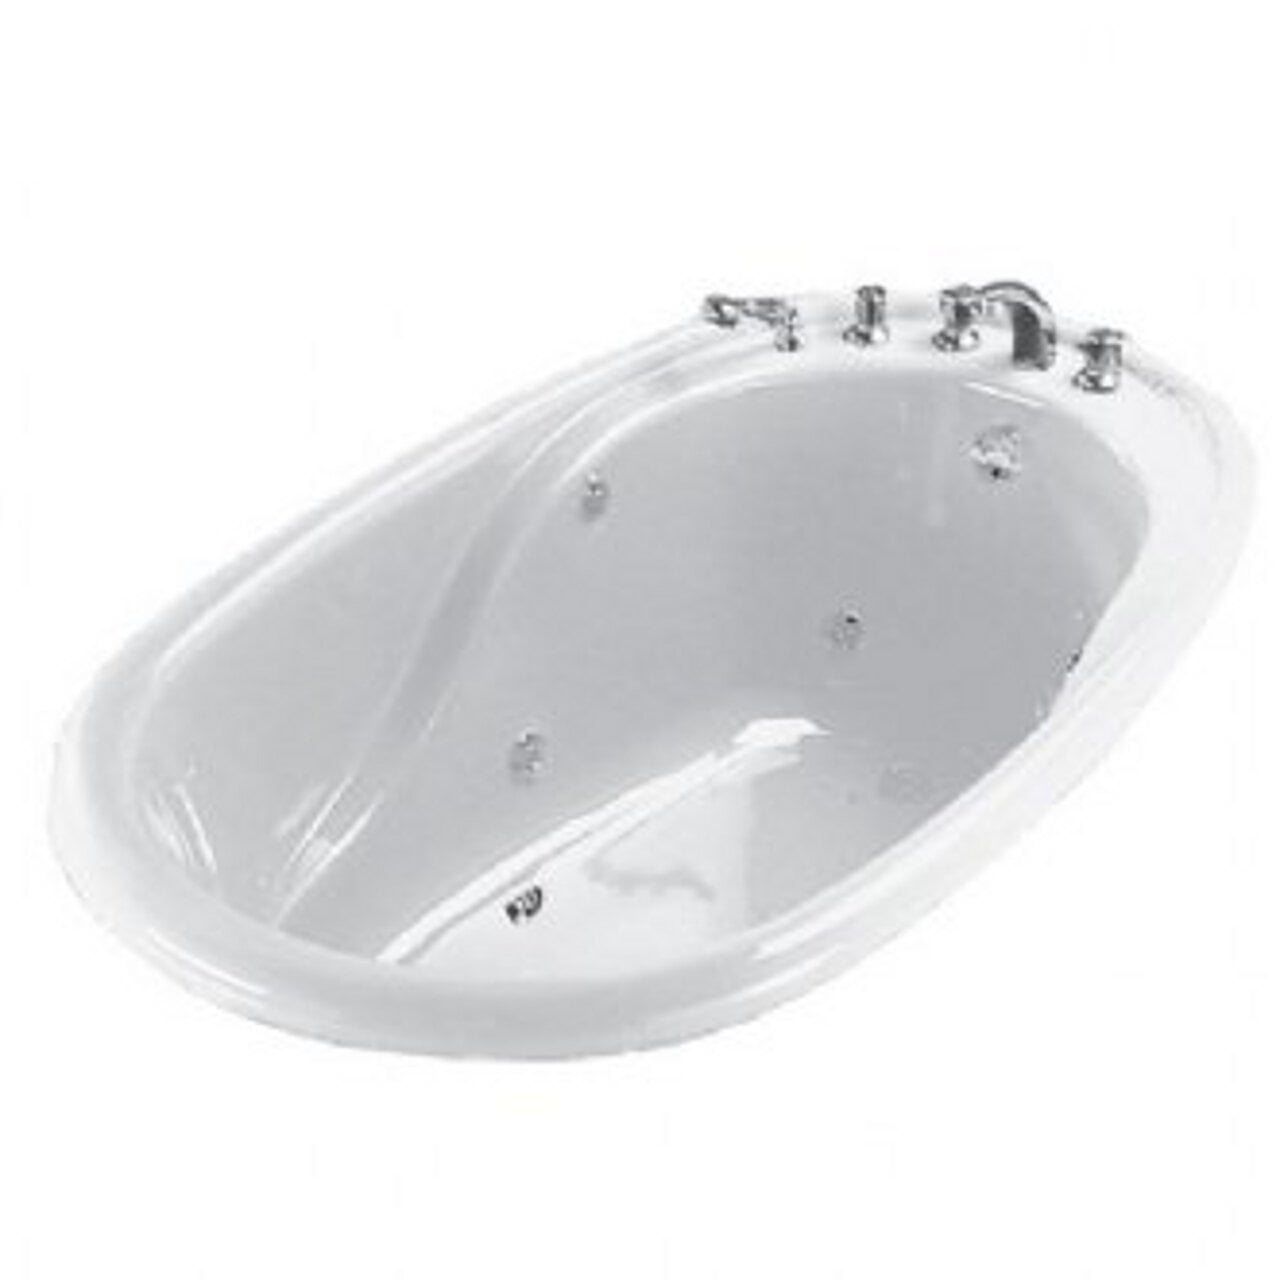 American Standard 2383 018wc 020 Oval Whirlpool With Ever Clean System White